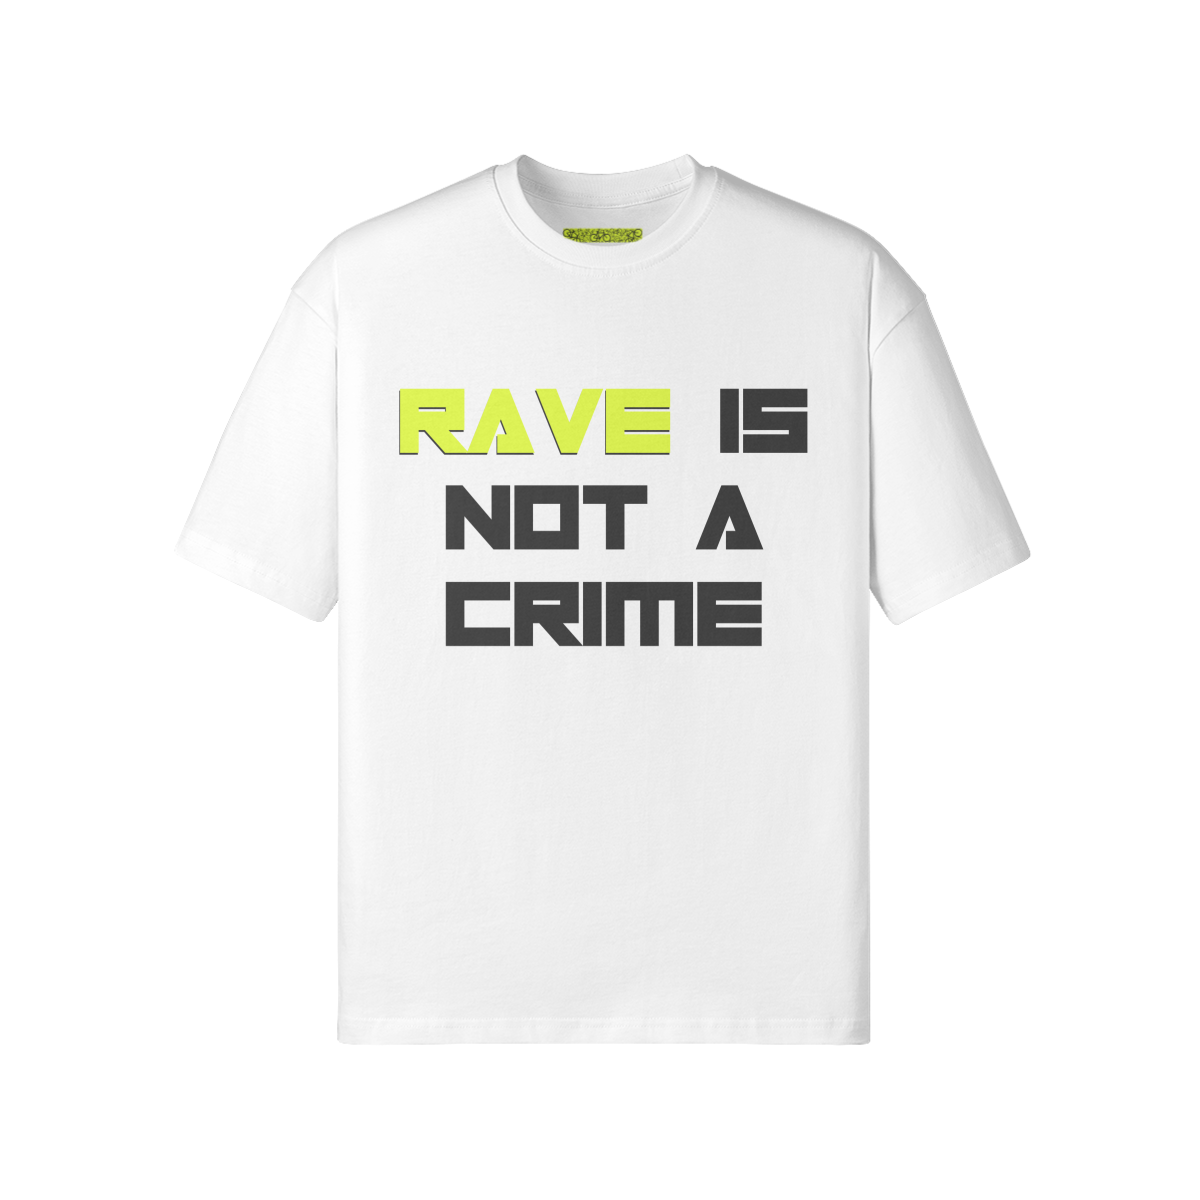 RAVE IS NOT A CRIME - Unisex Loose T-shirt